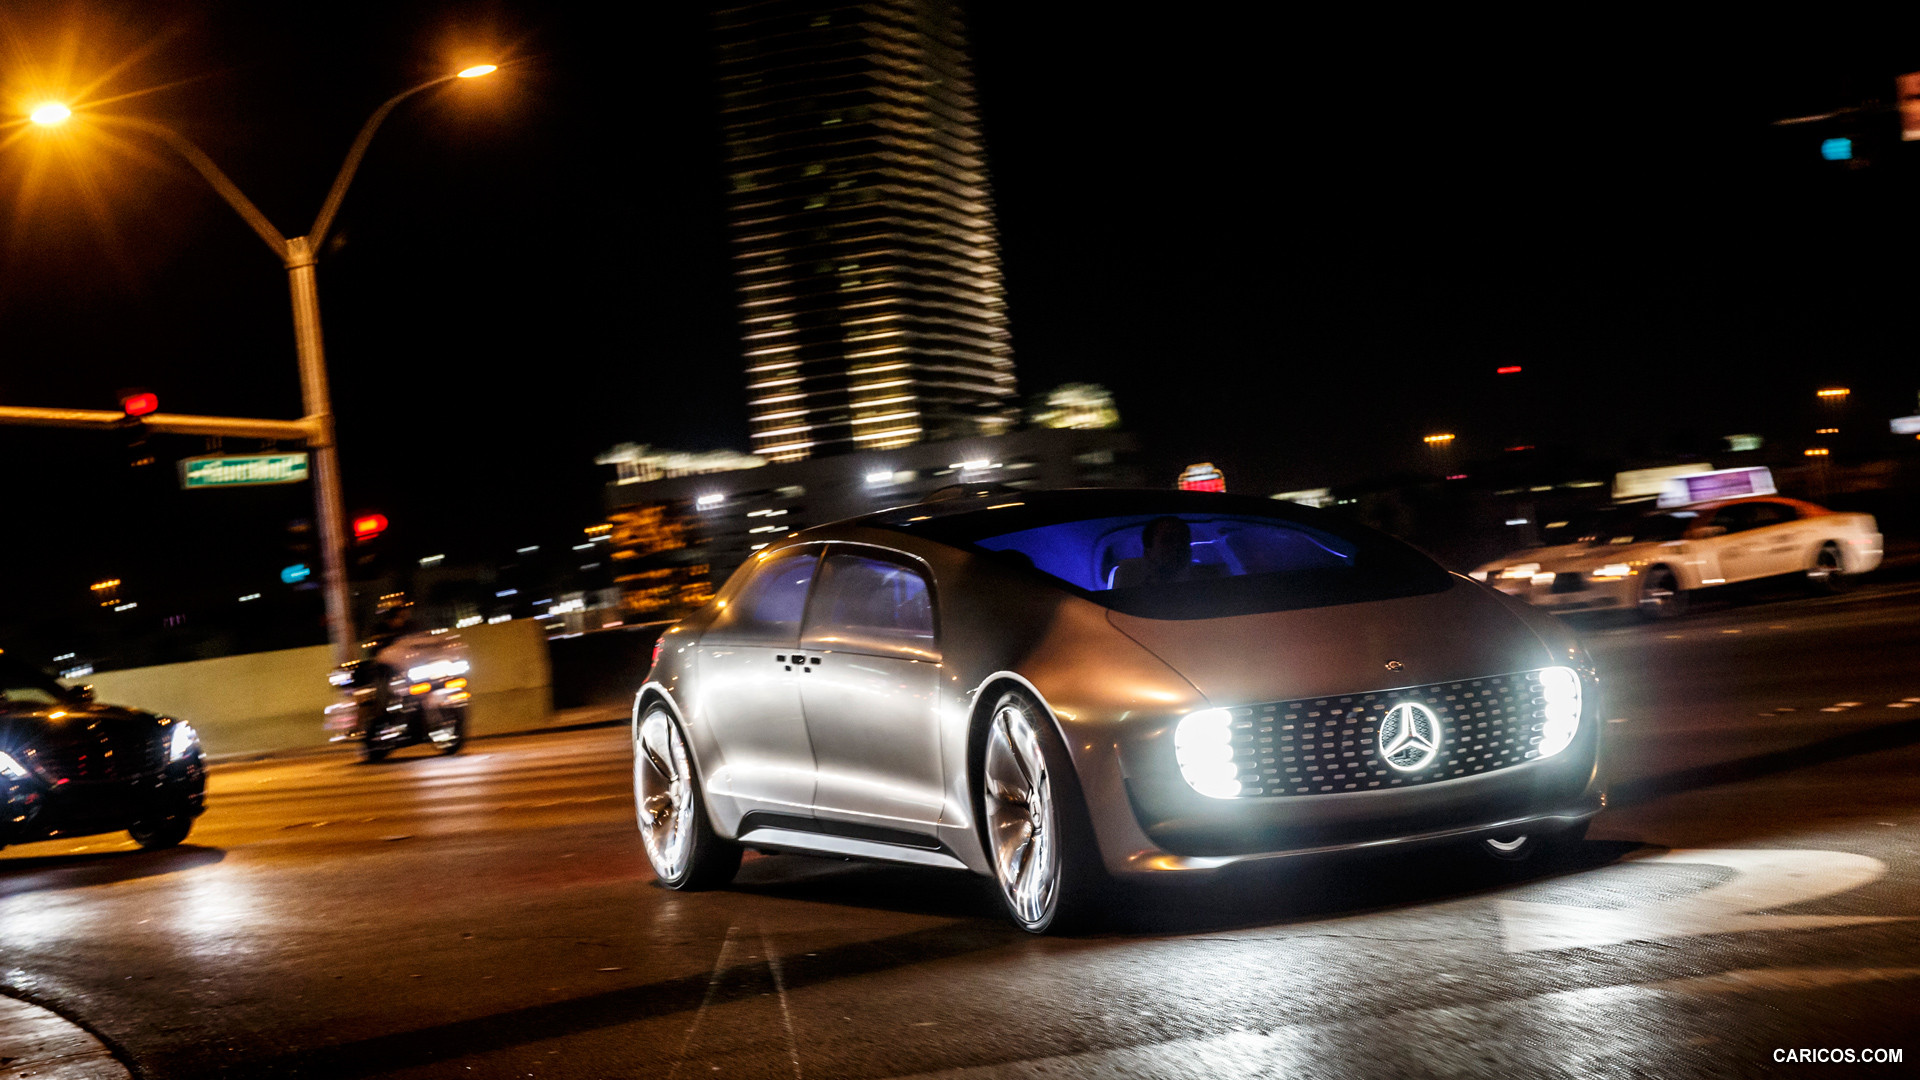 2015 Mercedes-Benz F 015 Luxury in Motion Concept  - Front, #45 of 92